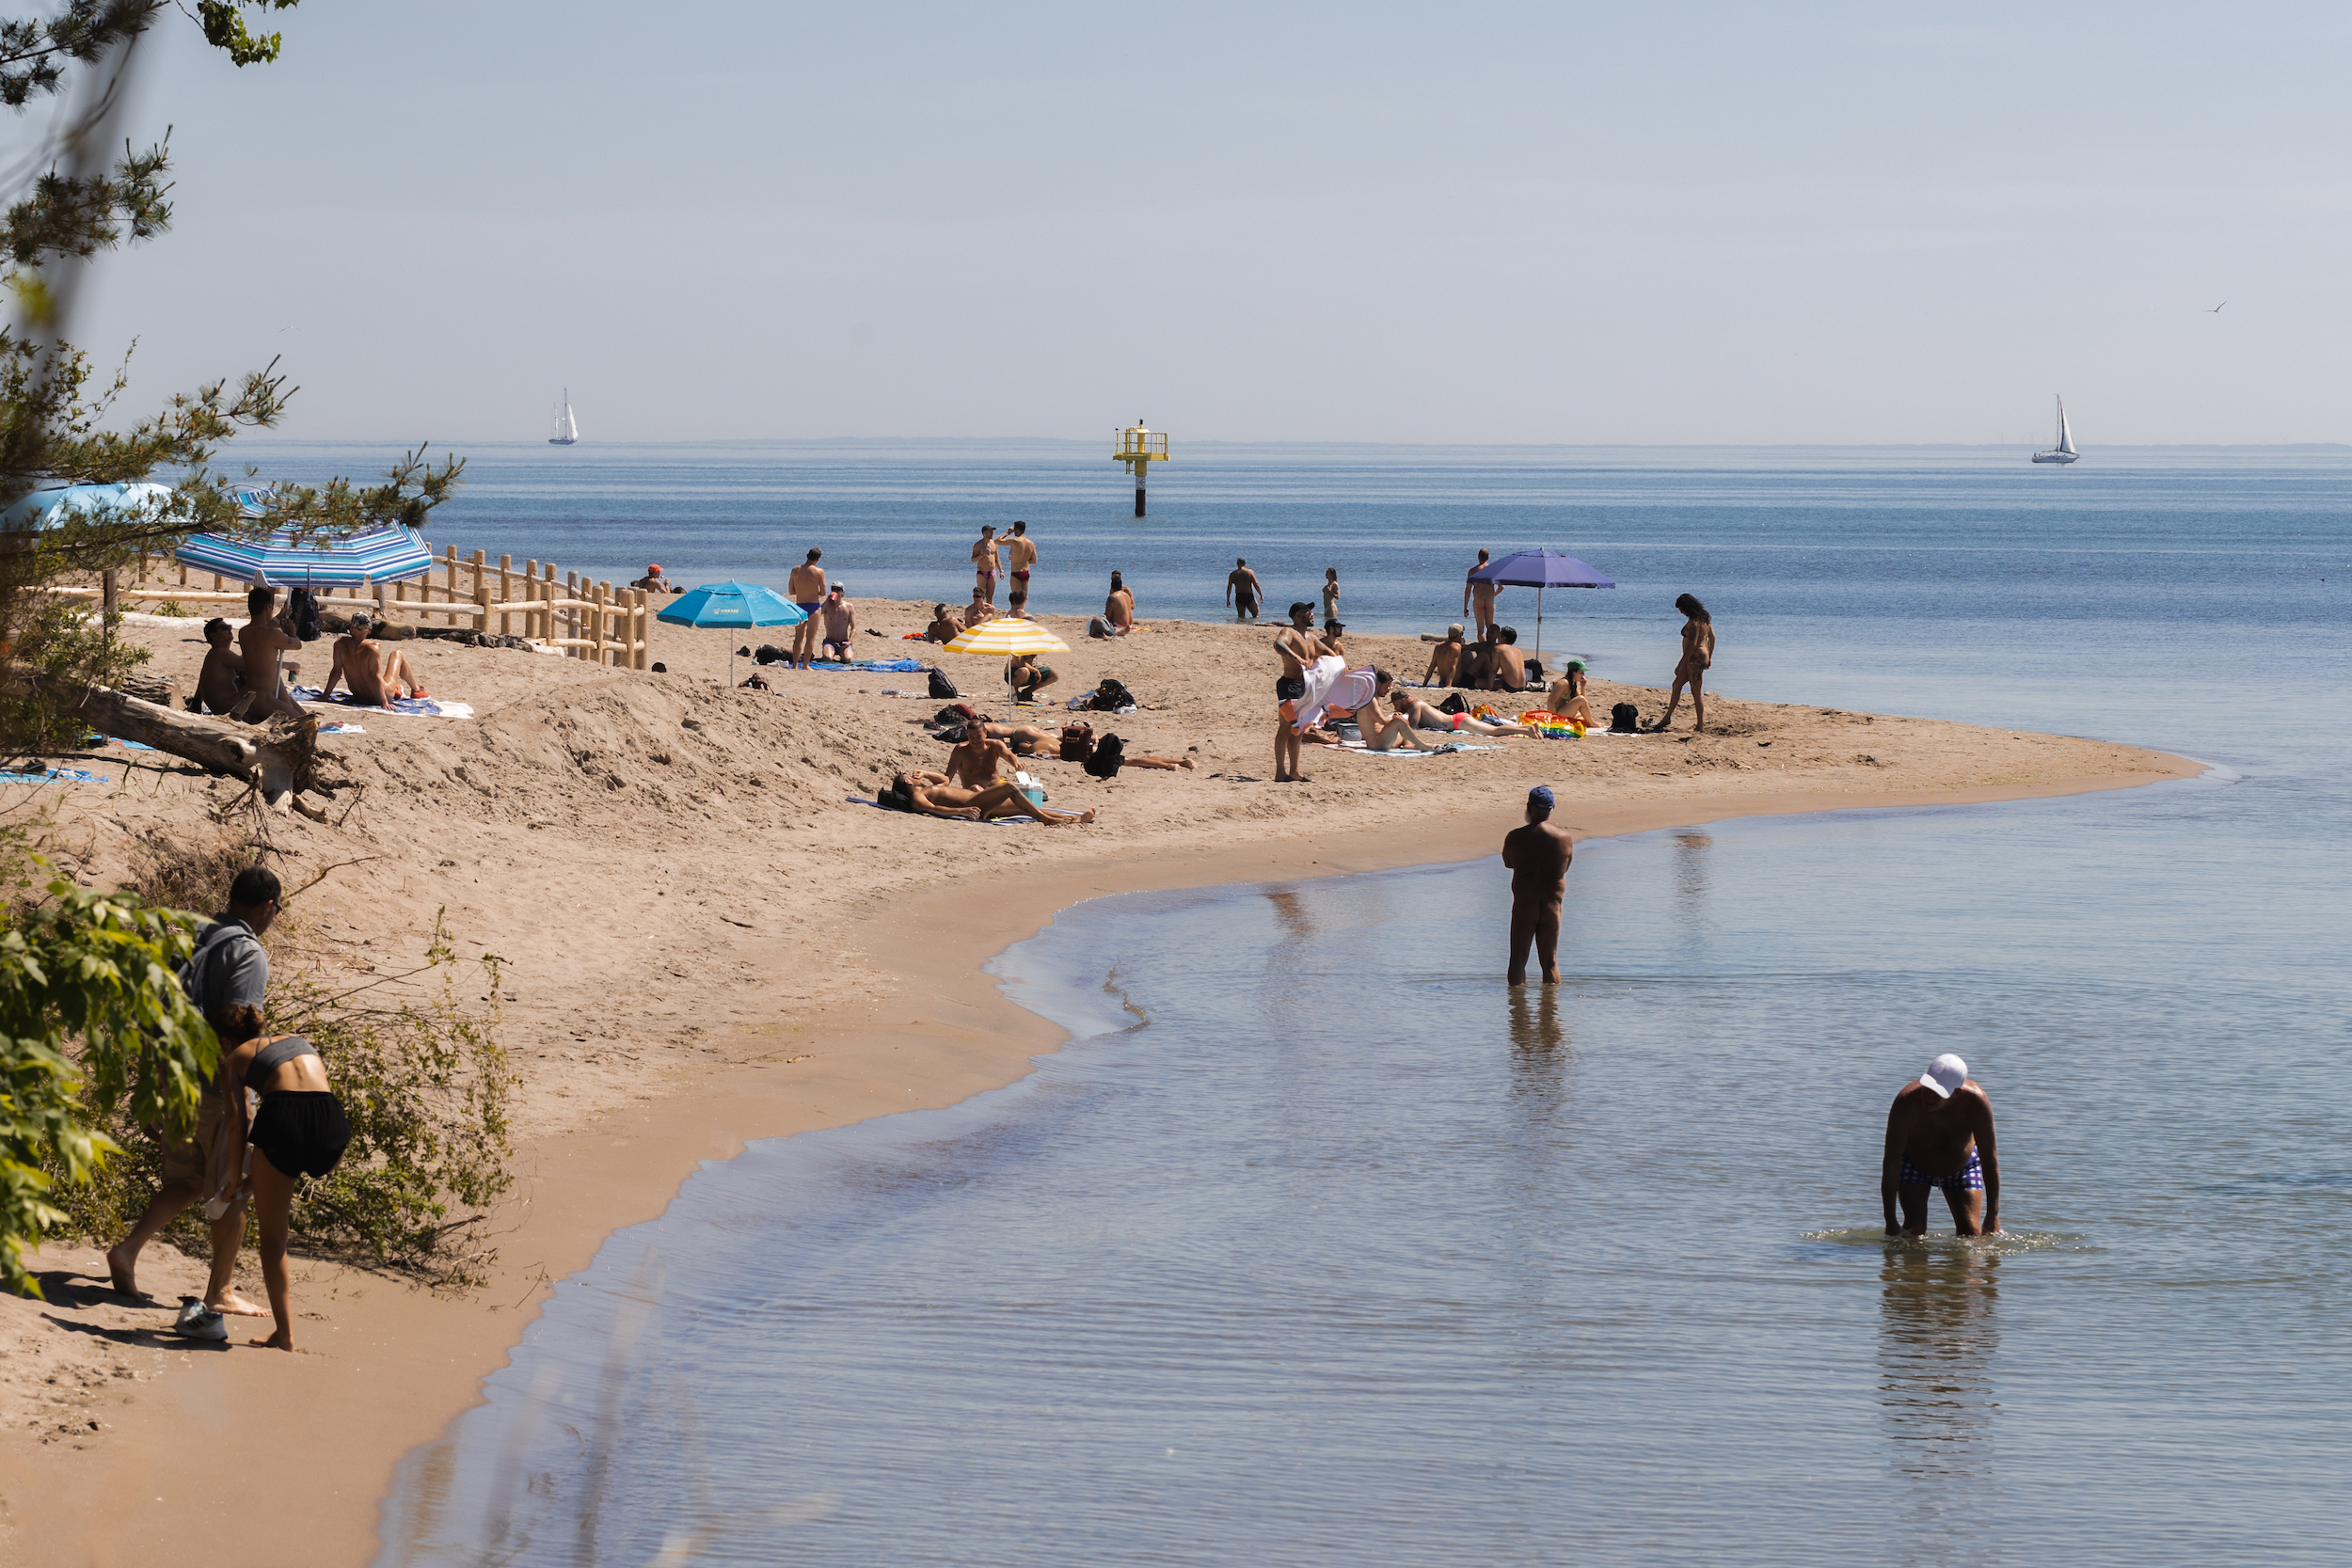 A view of Hanlan's Point Beach, the subject of our story on Pride Toronto in 2022. Photo: Kirk Lisaj / The Narwhal